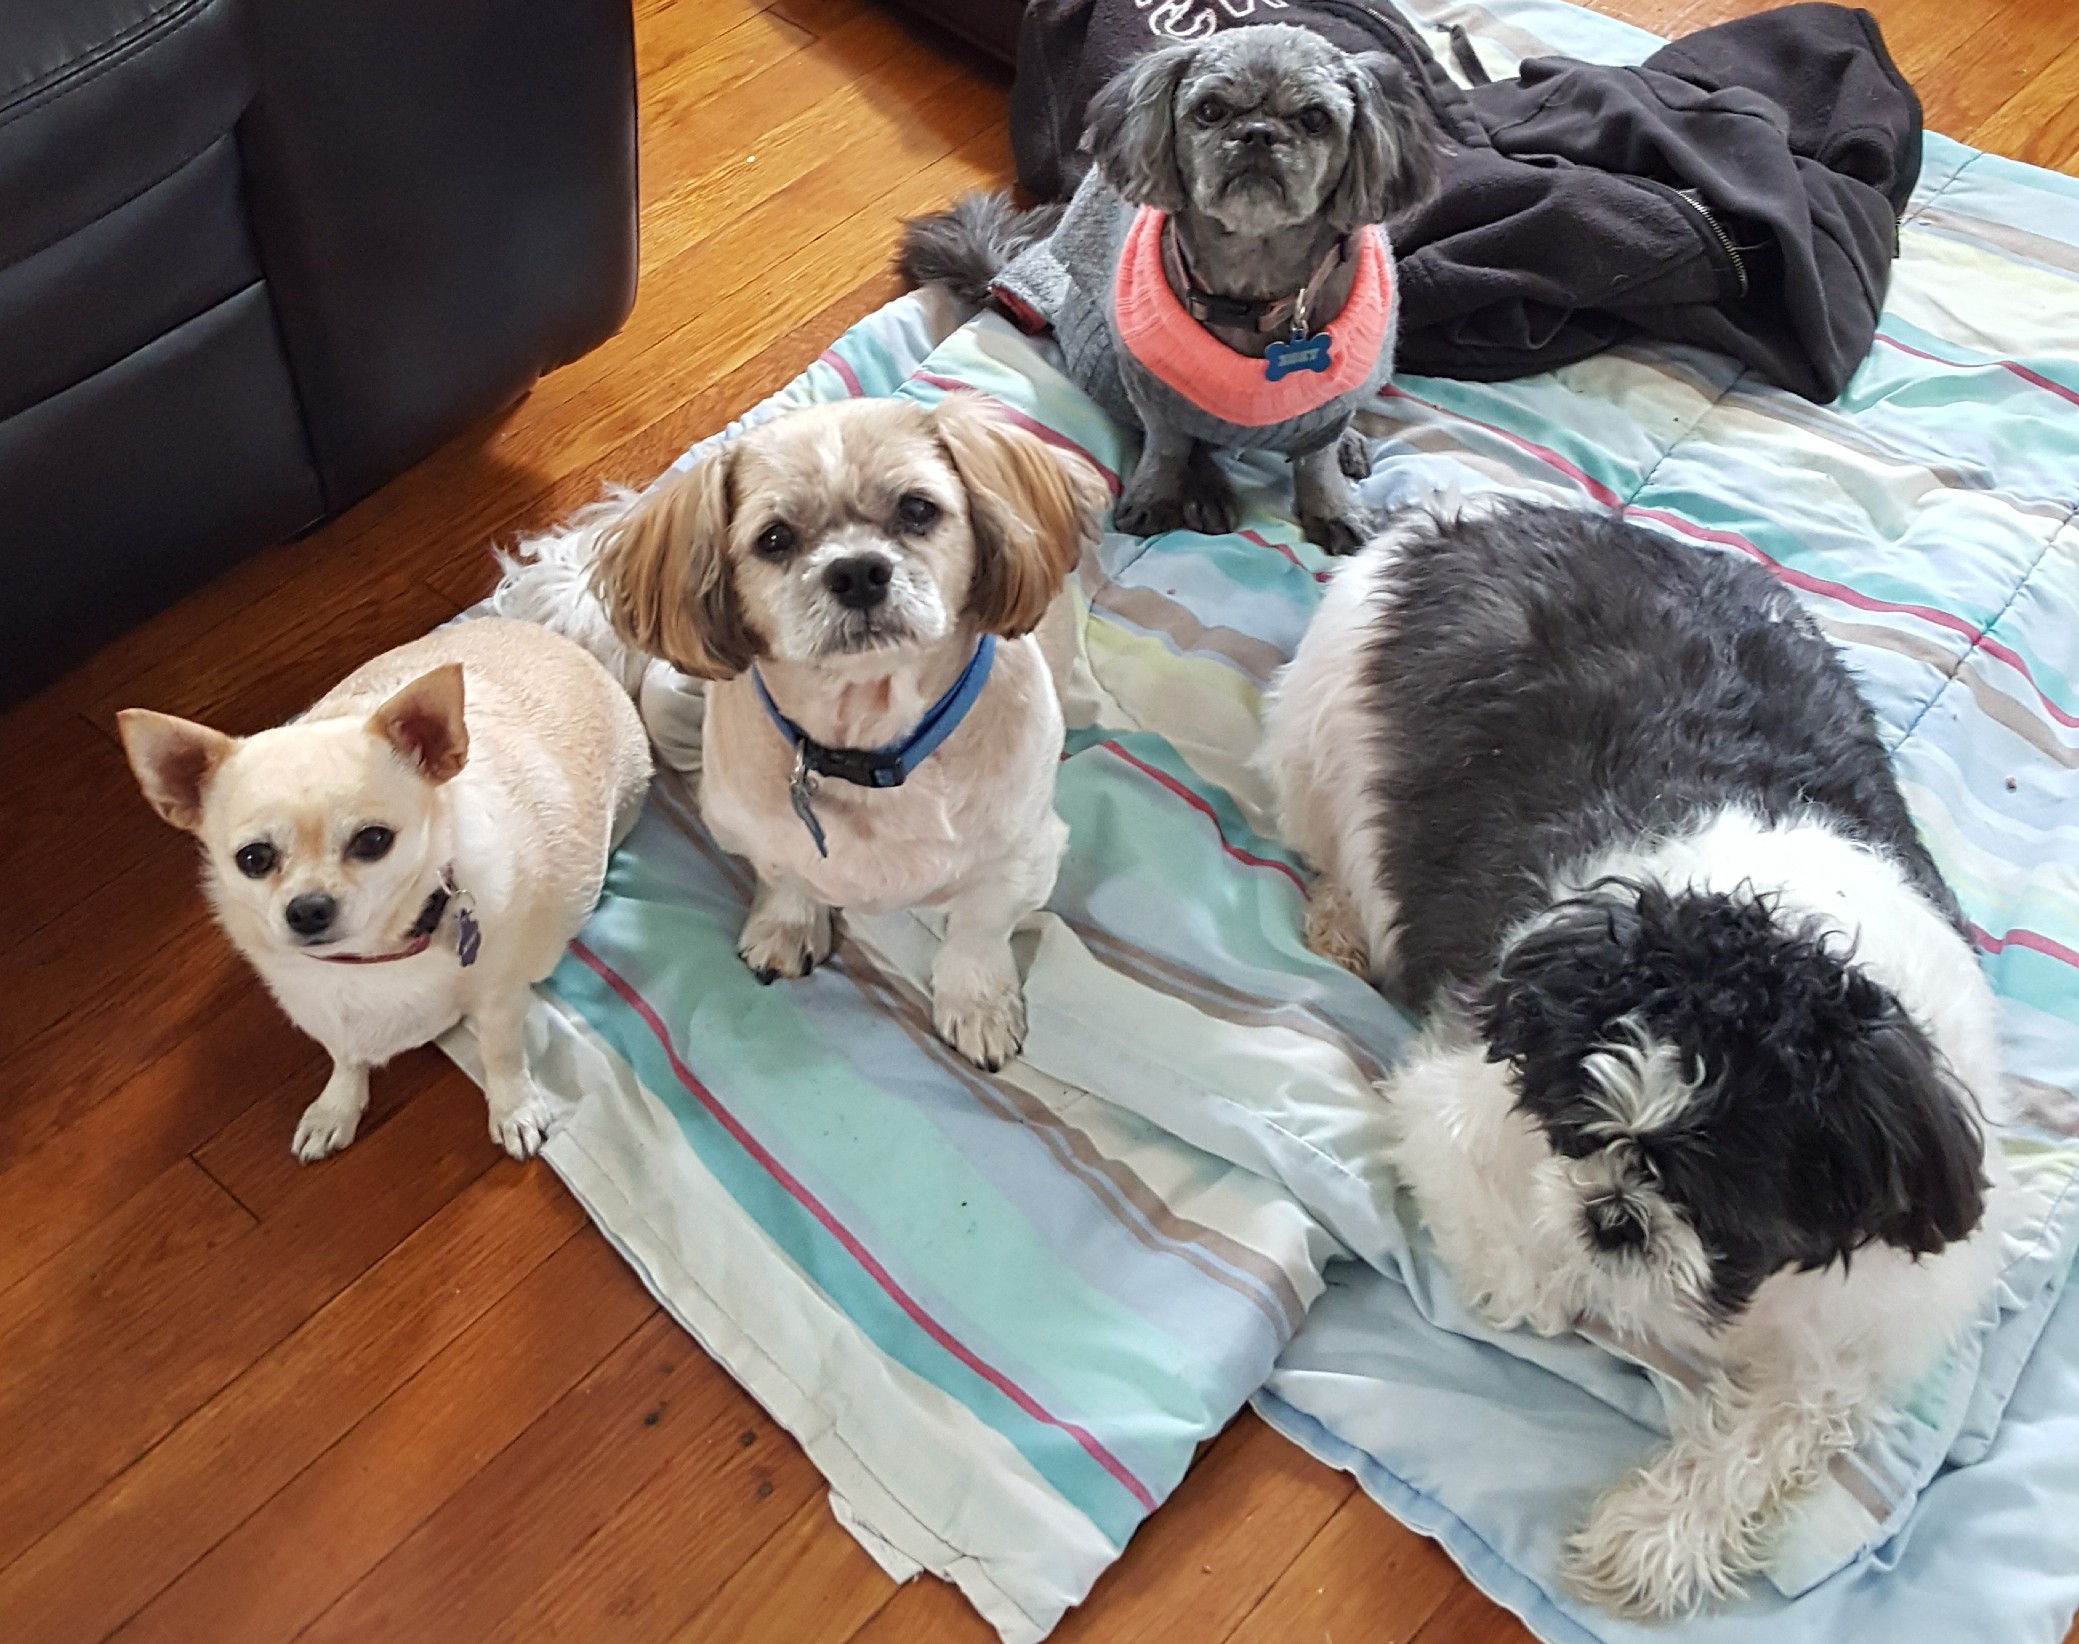 Modern Artistic Take on groups of Roman citizens gathering to listen to Politicians. The four dogs, from left to right: a blonde chihuahua, blonde shih-tzu, black shih-tzu, and black and white shih-tzu, are sitting on a striped-blue blanket, looking up at unseen photographer. The unseen photographer represents the vast amount of politicians over the course of Roman history. The dogs represent the ordinary Roman citizens listening to the orator, waiting to see if they will give the orator their nod of approval.